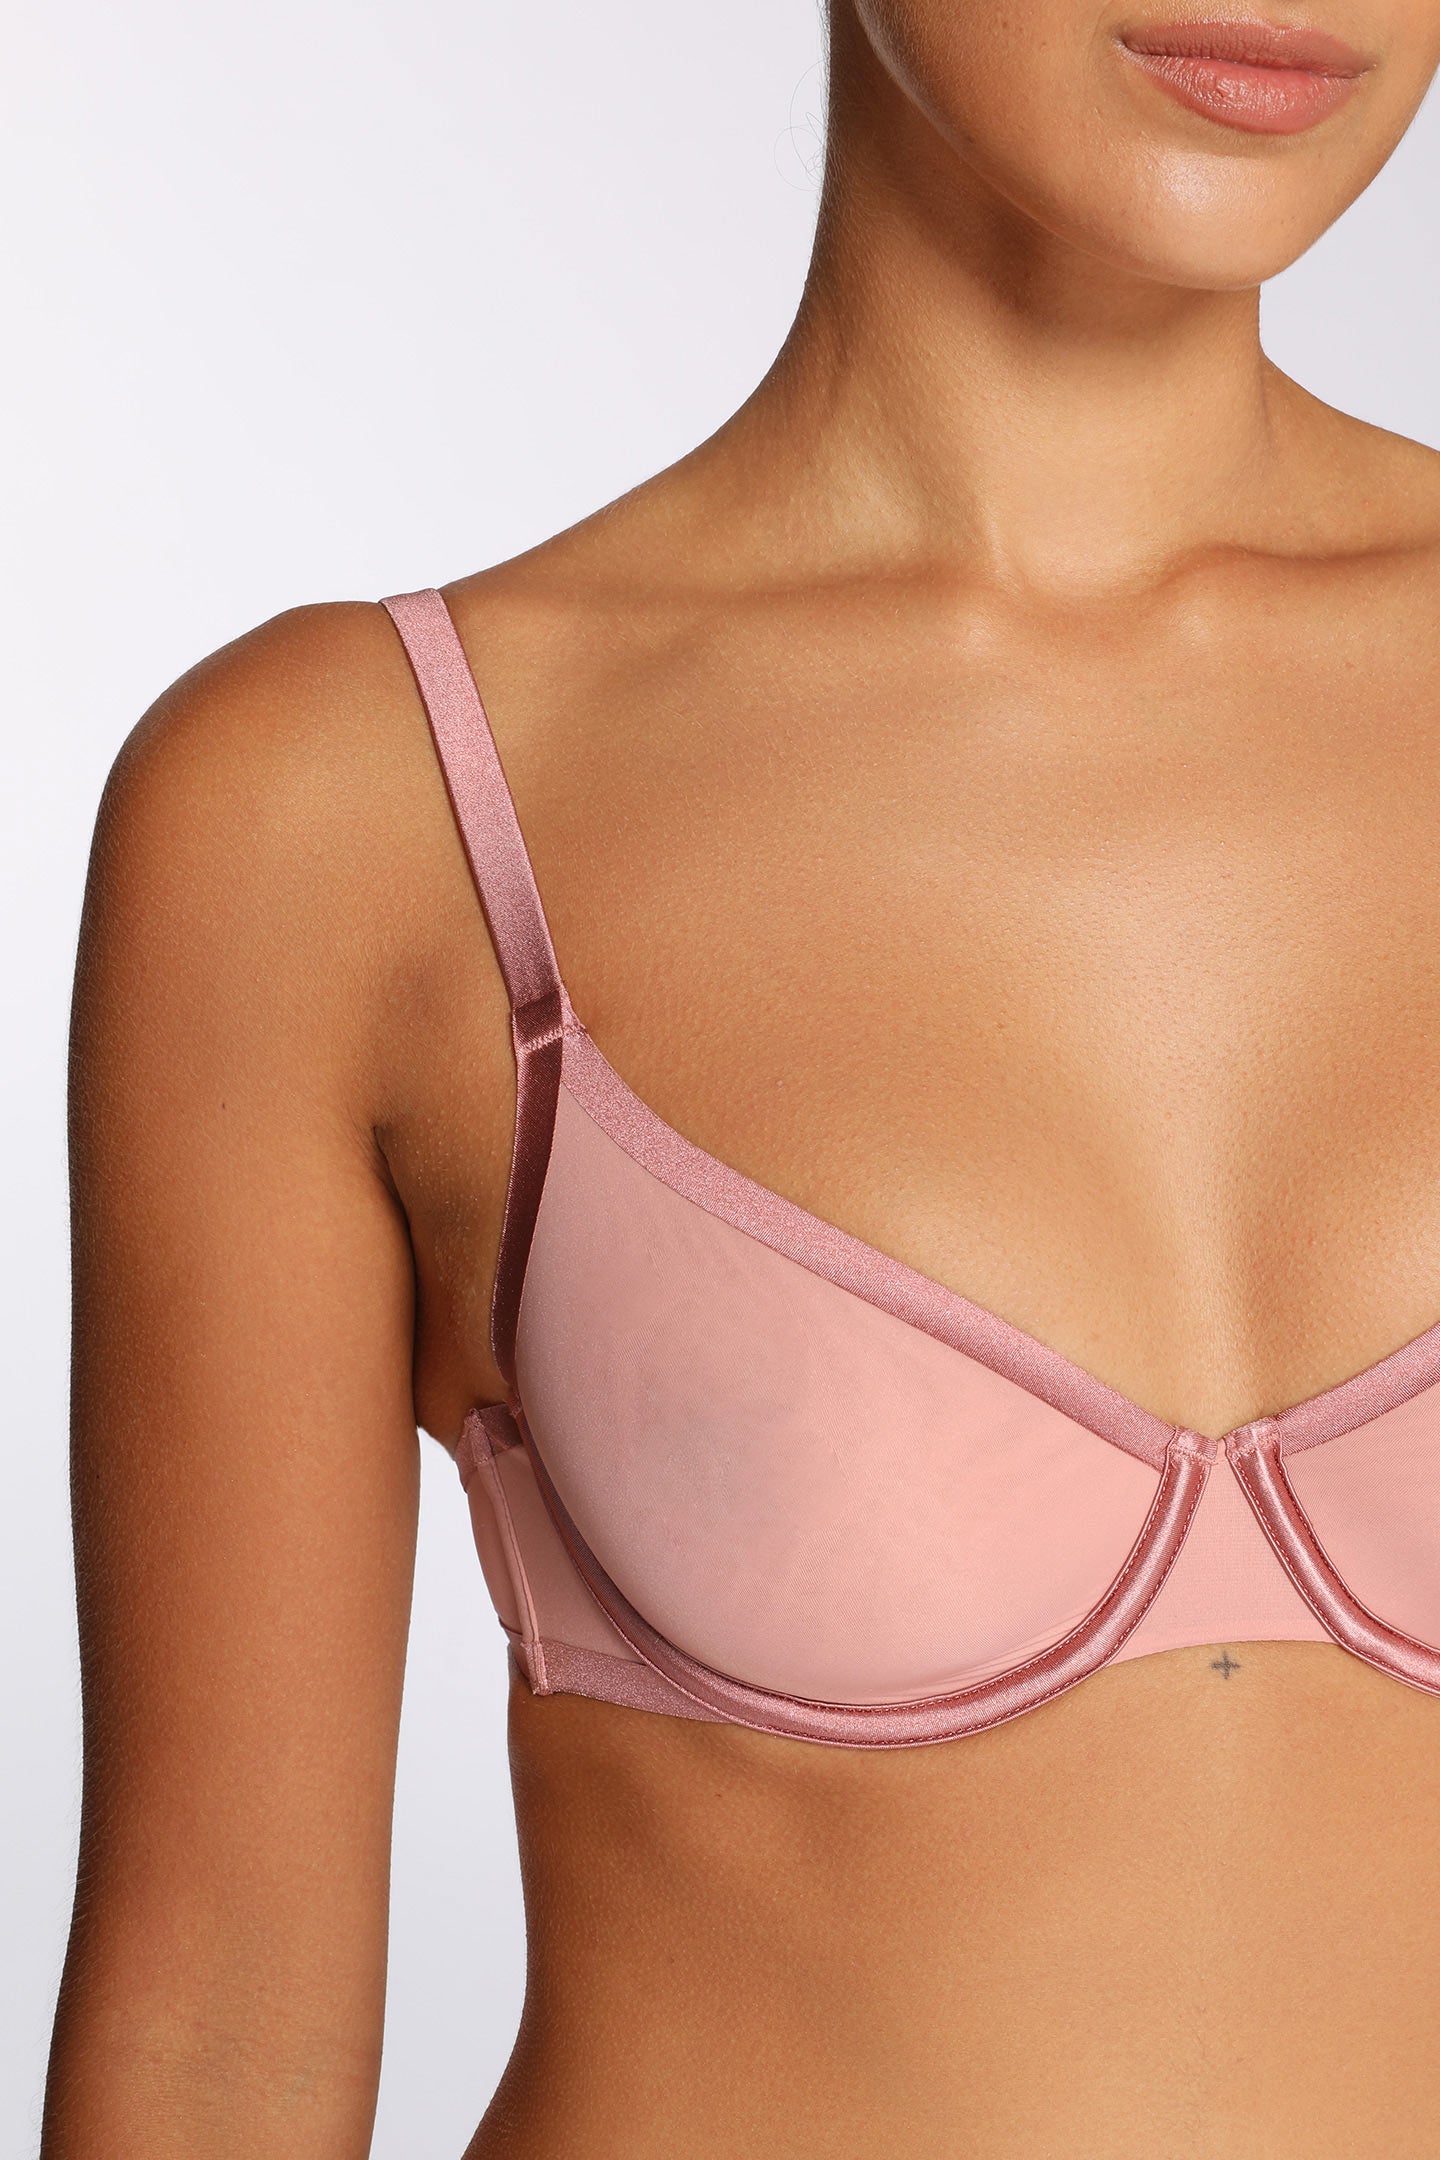 Buy LITE PLUNGE SOFT CUP BRA online at Intimo